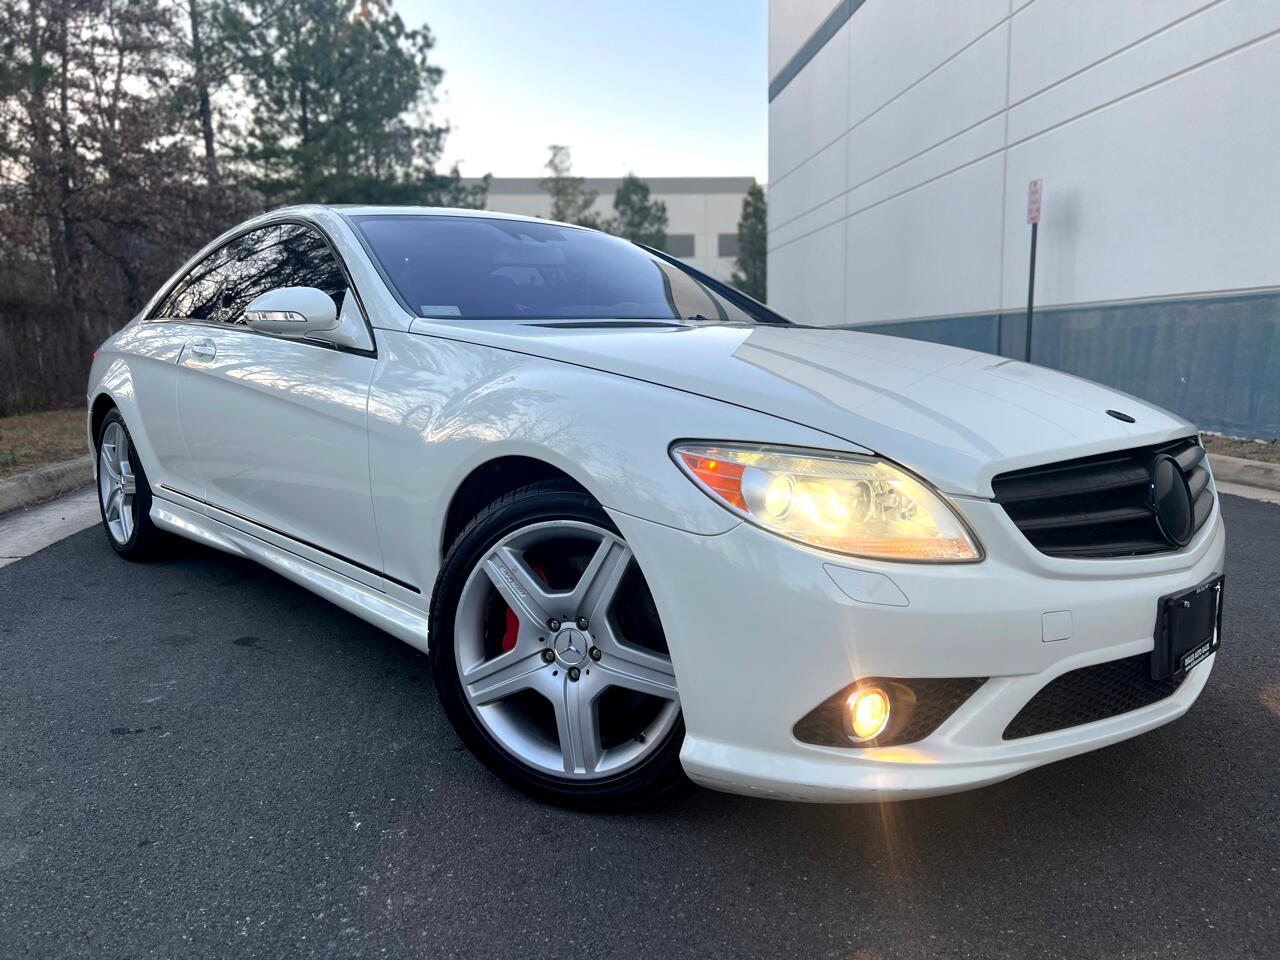 Used 2009 Mercedes-Benz CL-Class CL550 4MATIC for Sale in Chantilly VA  20152 Dulles Auto Sales